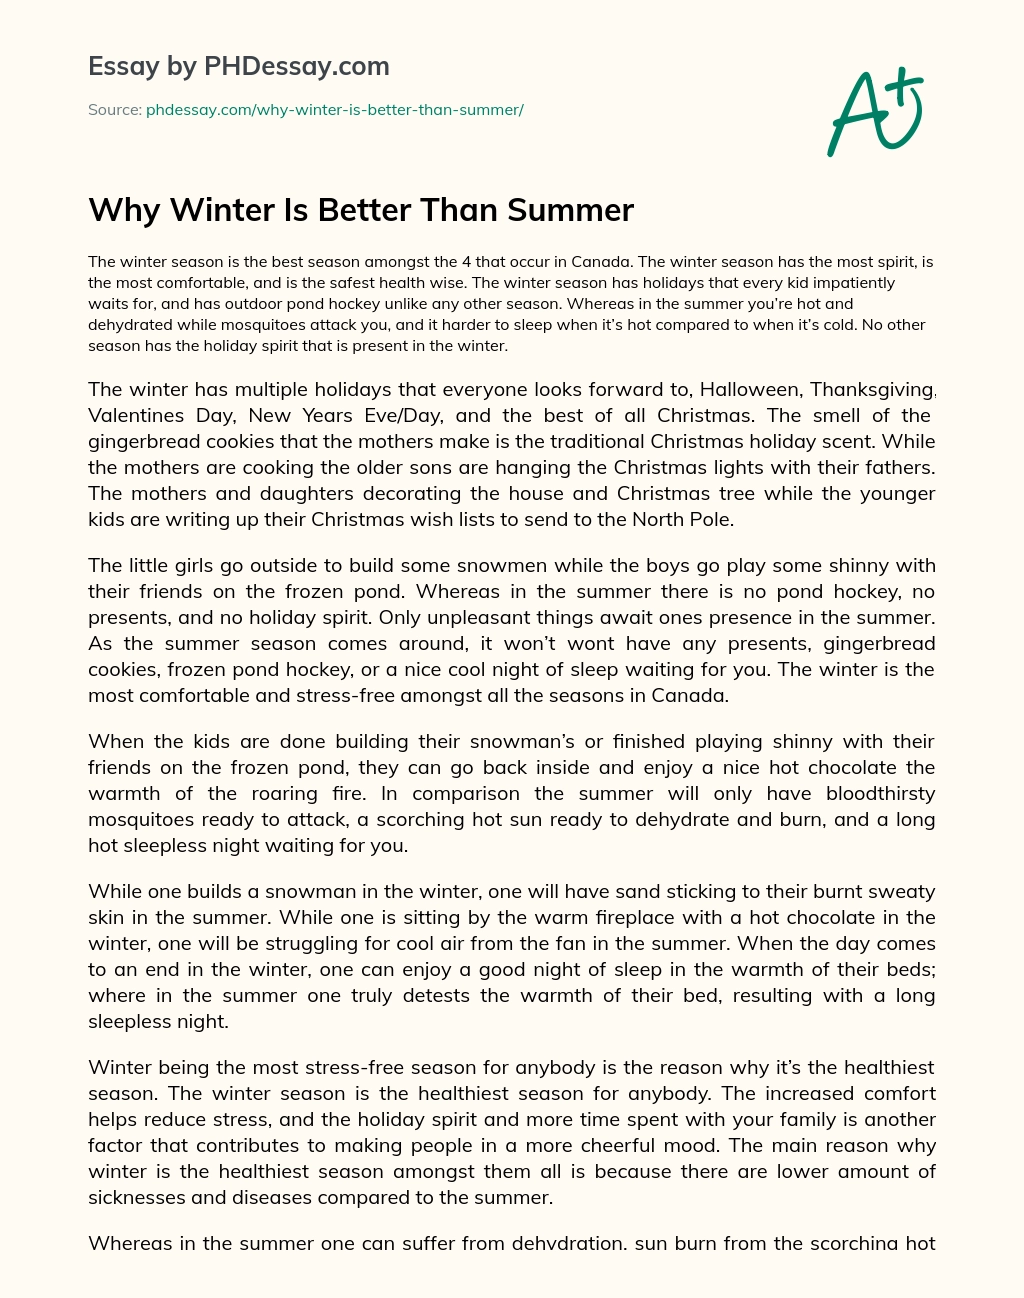 Why Winter Is Better Than Summer essay